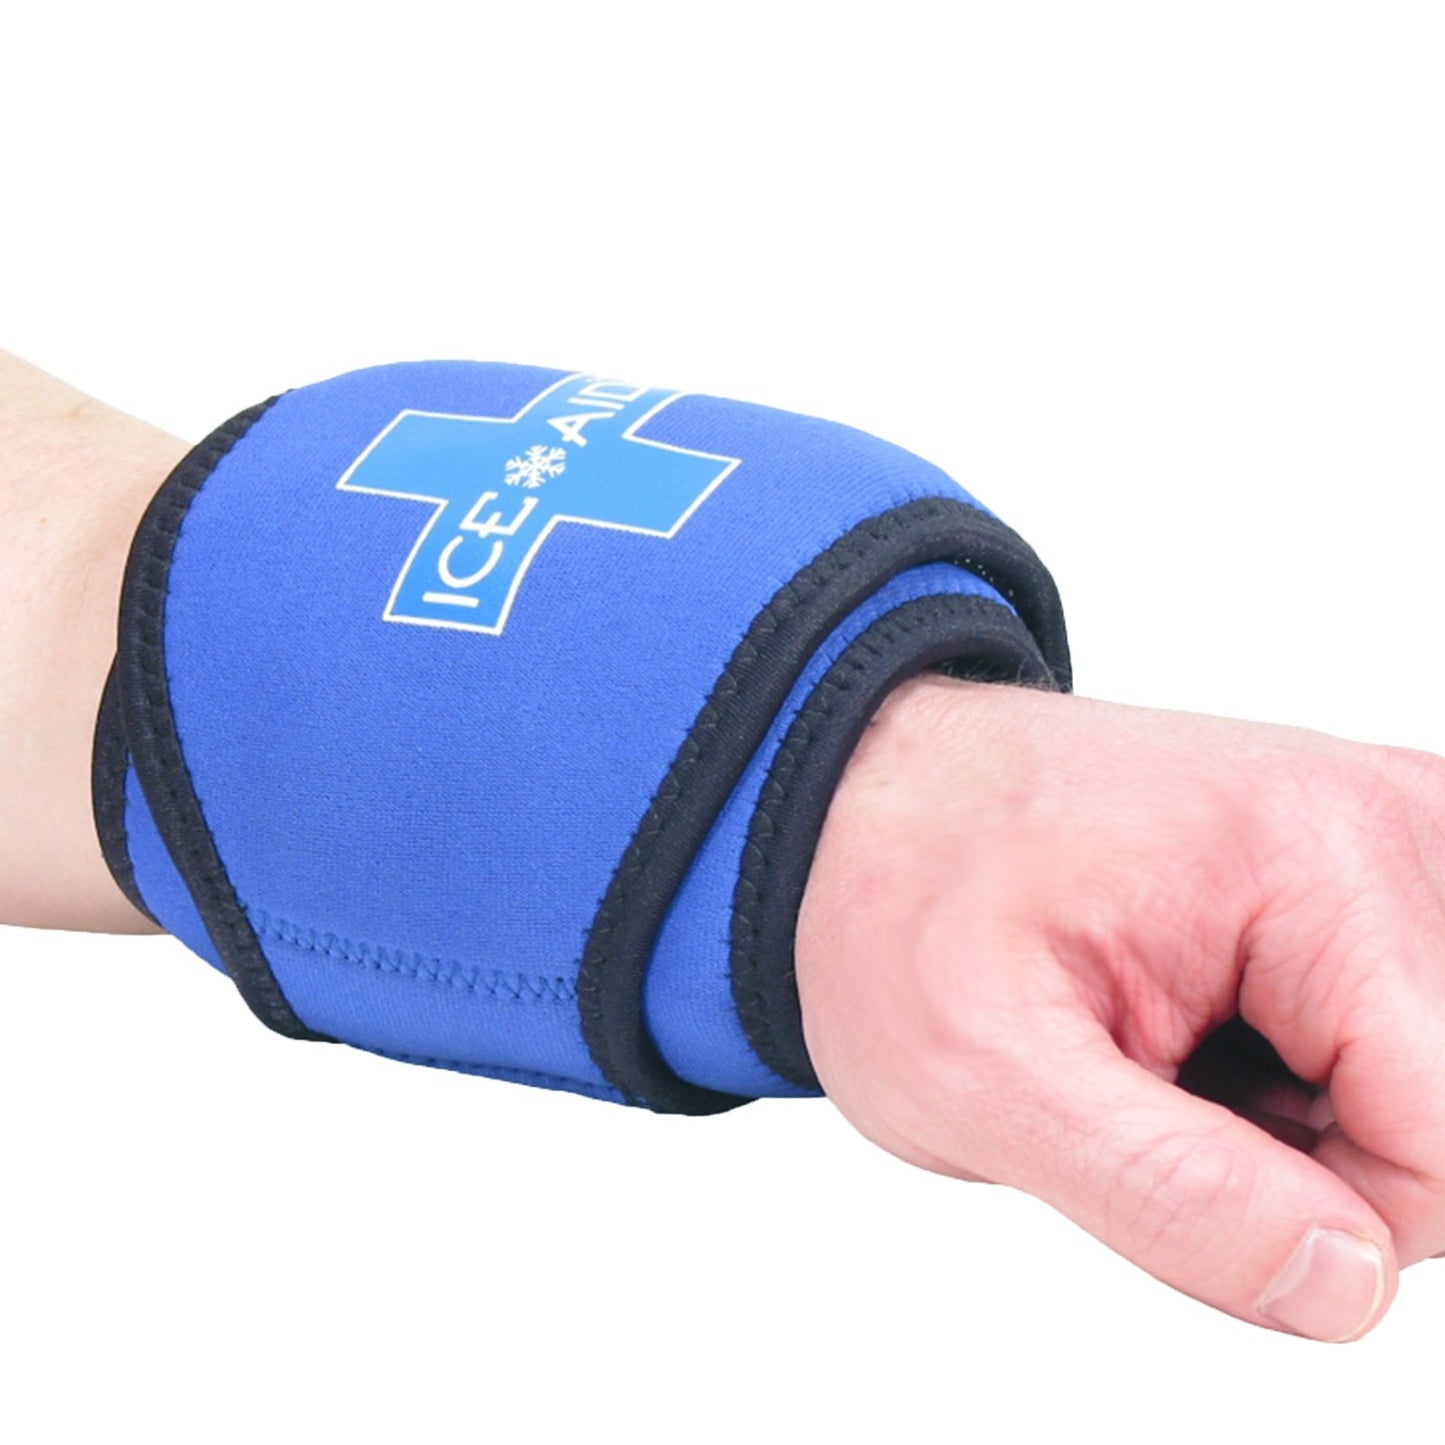 Neowrap 4-in-1 Hot/Cold Therapy Wrap